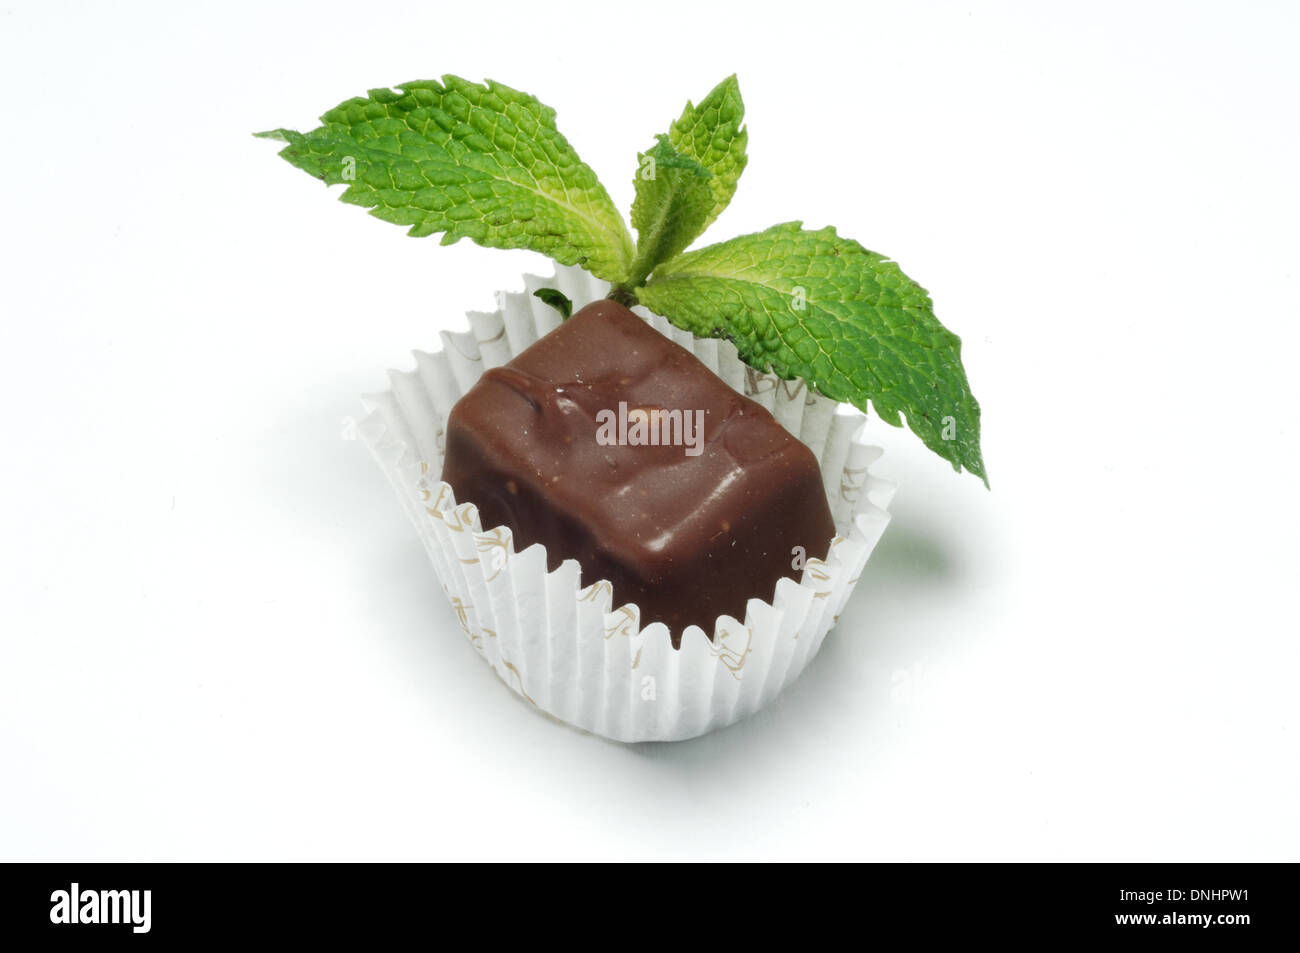 A small packaged chocolate treat with a sprig of mint leaves, Stock Photo